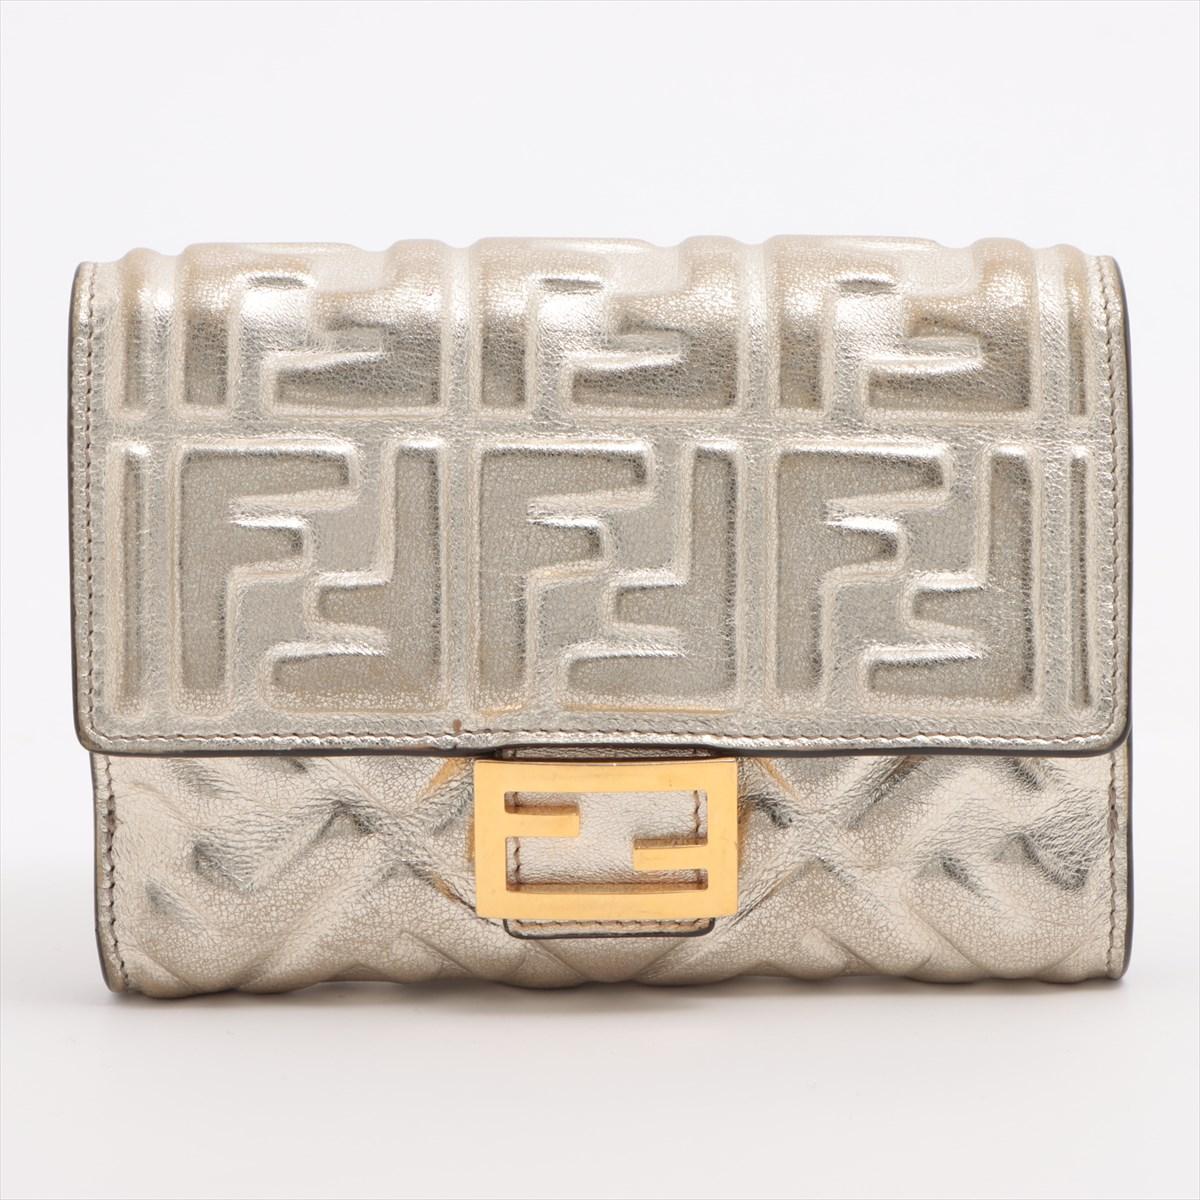 The Fendi Embossed Zucca Laminated Leather Bifold Wallet in Silver is a sleek and sophisticated accessory that exudes luxury and style. Crafted from high-quality laminated leather, the wallet features Fendi's iconic Zucca pattern embossed